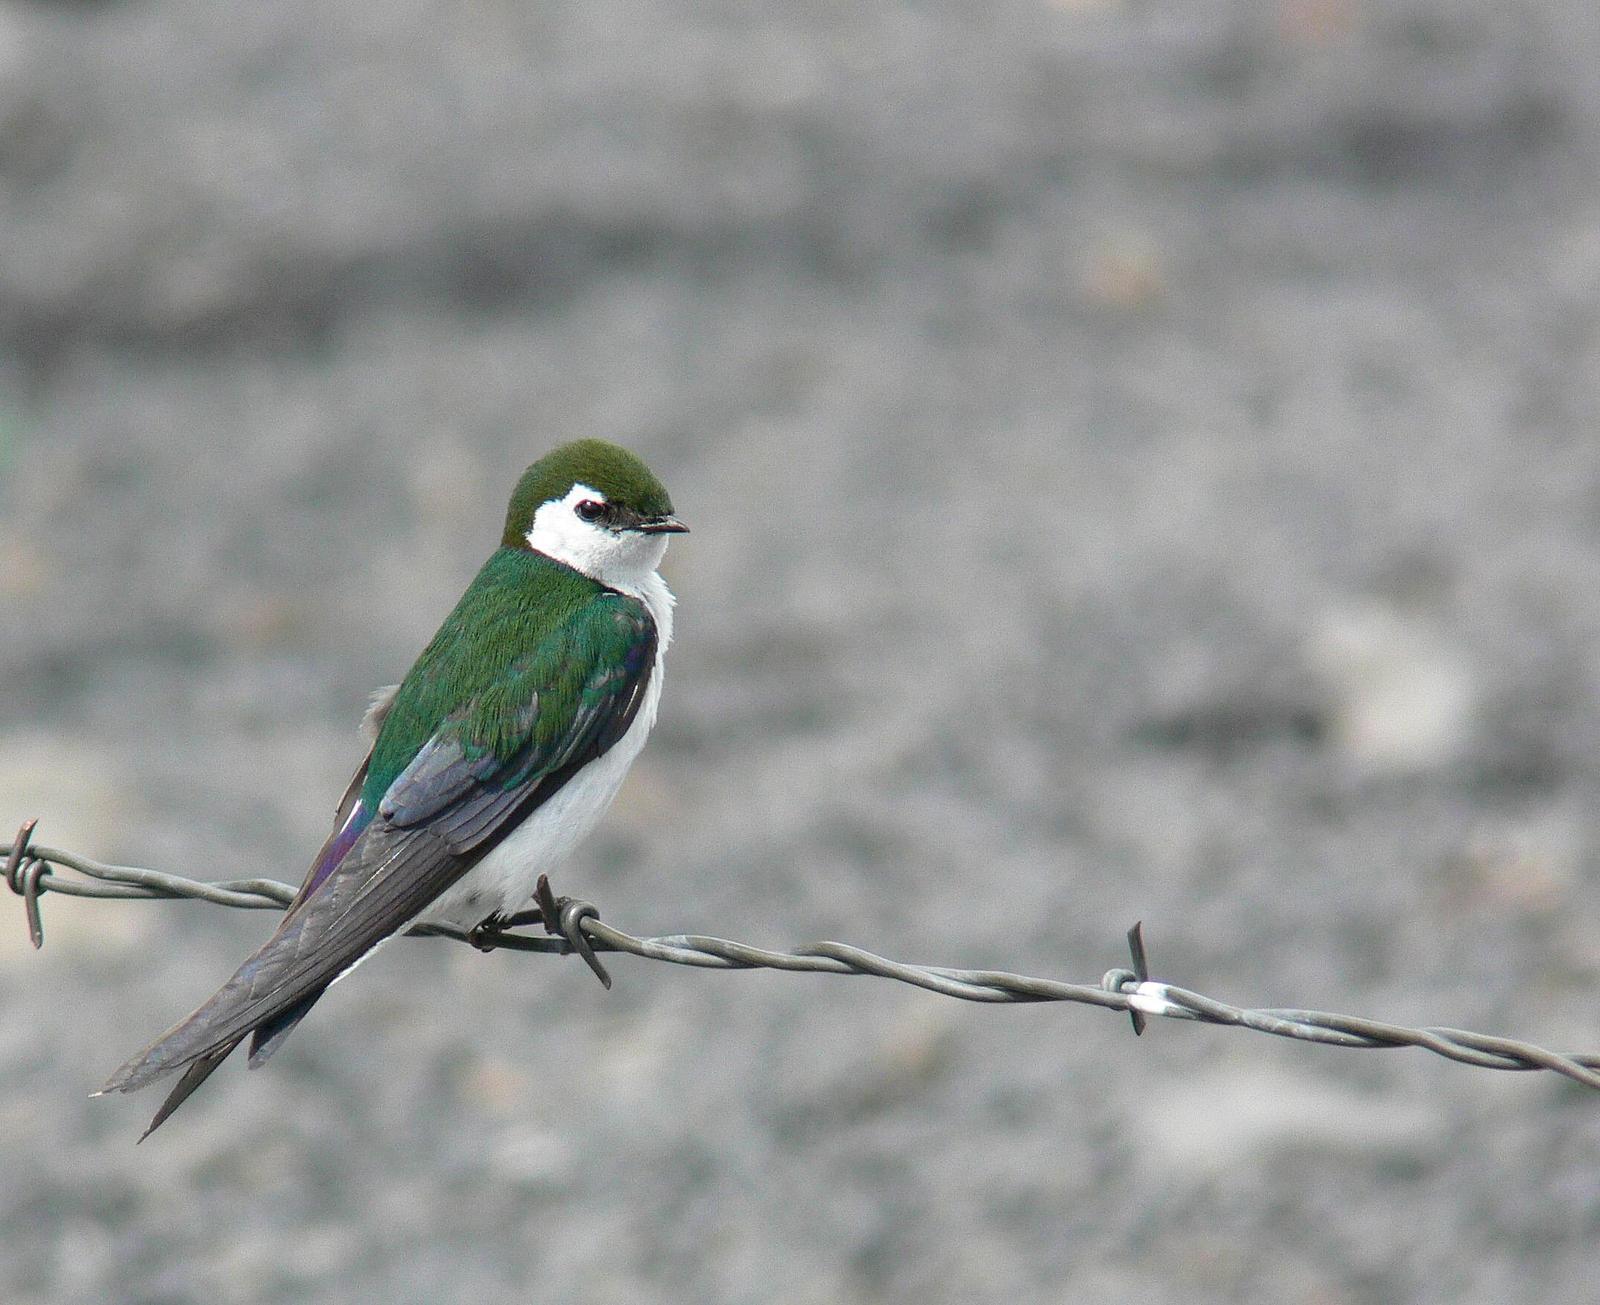 Violet-green Swallow Photo by Steven Mlodinow